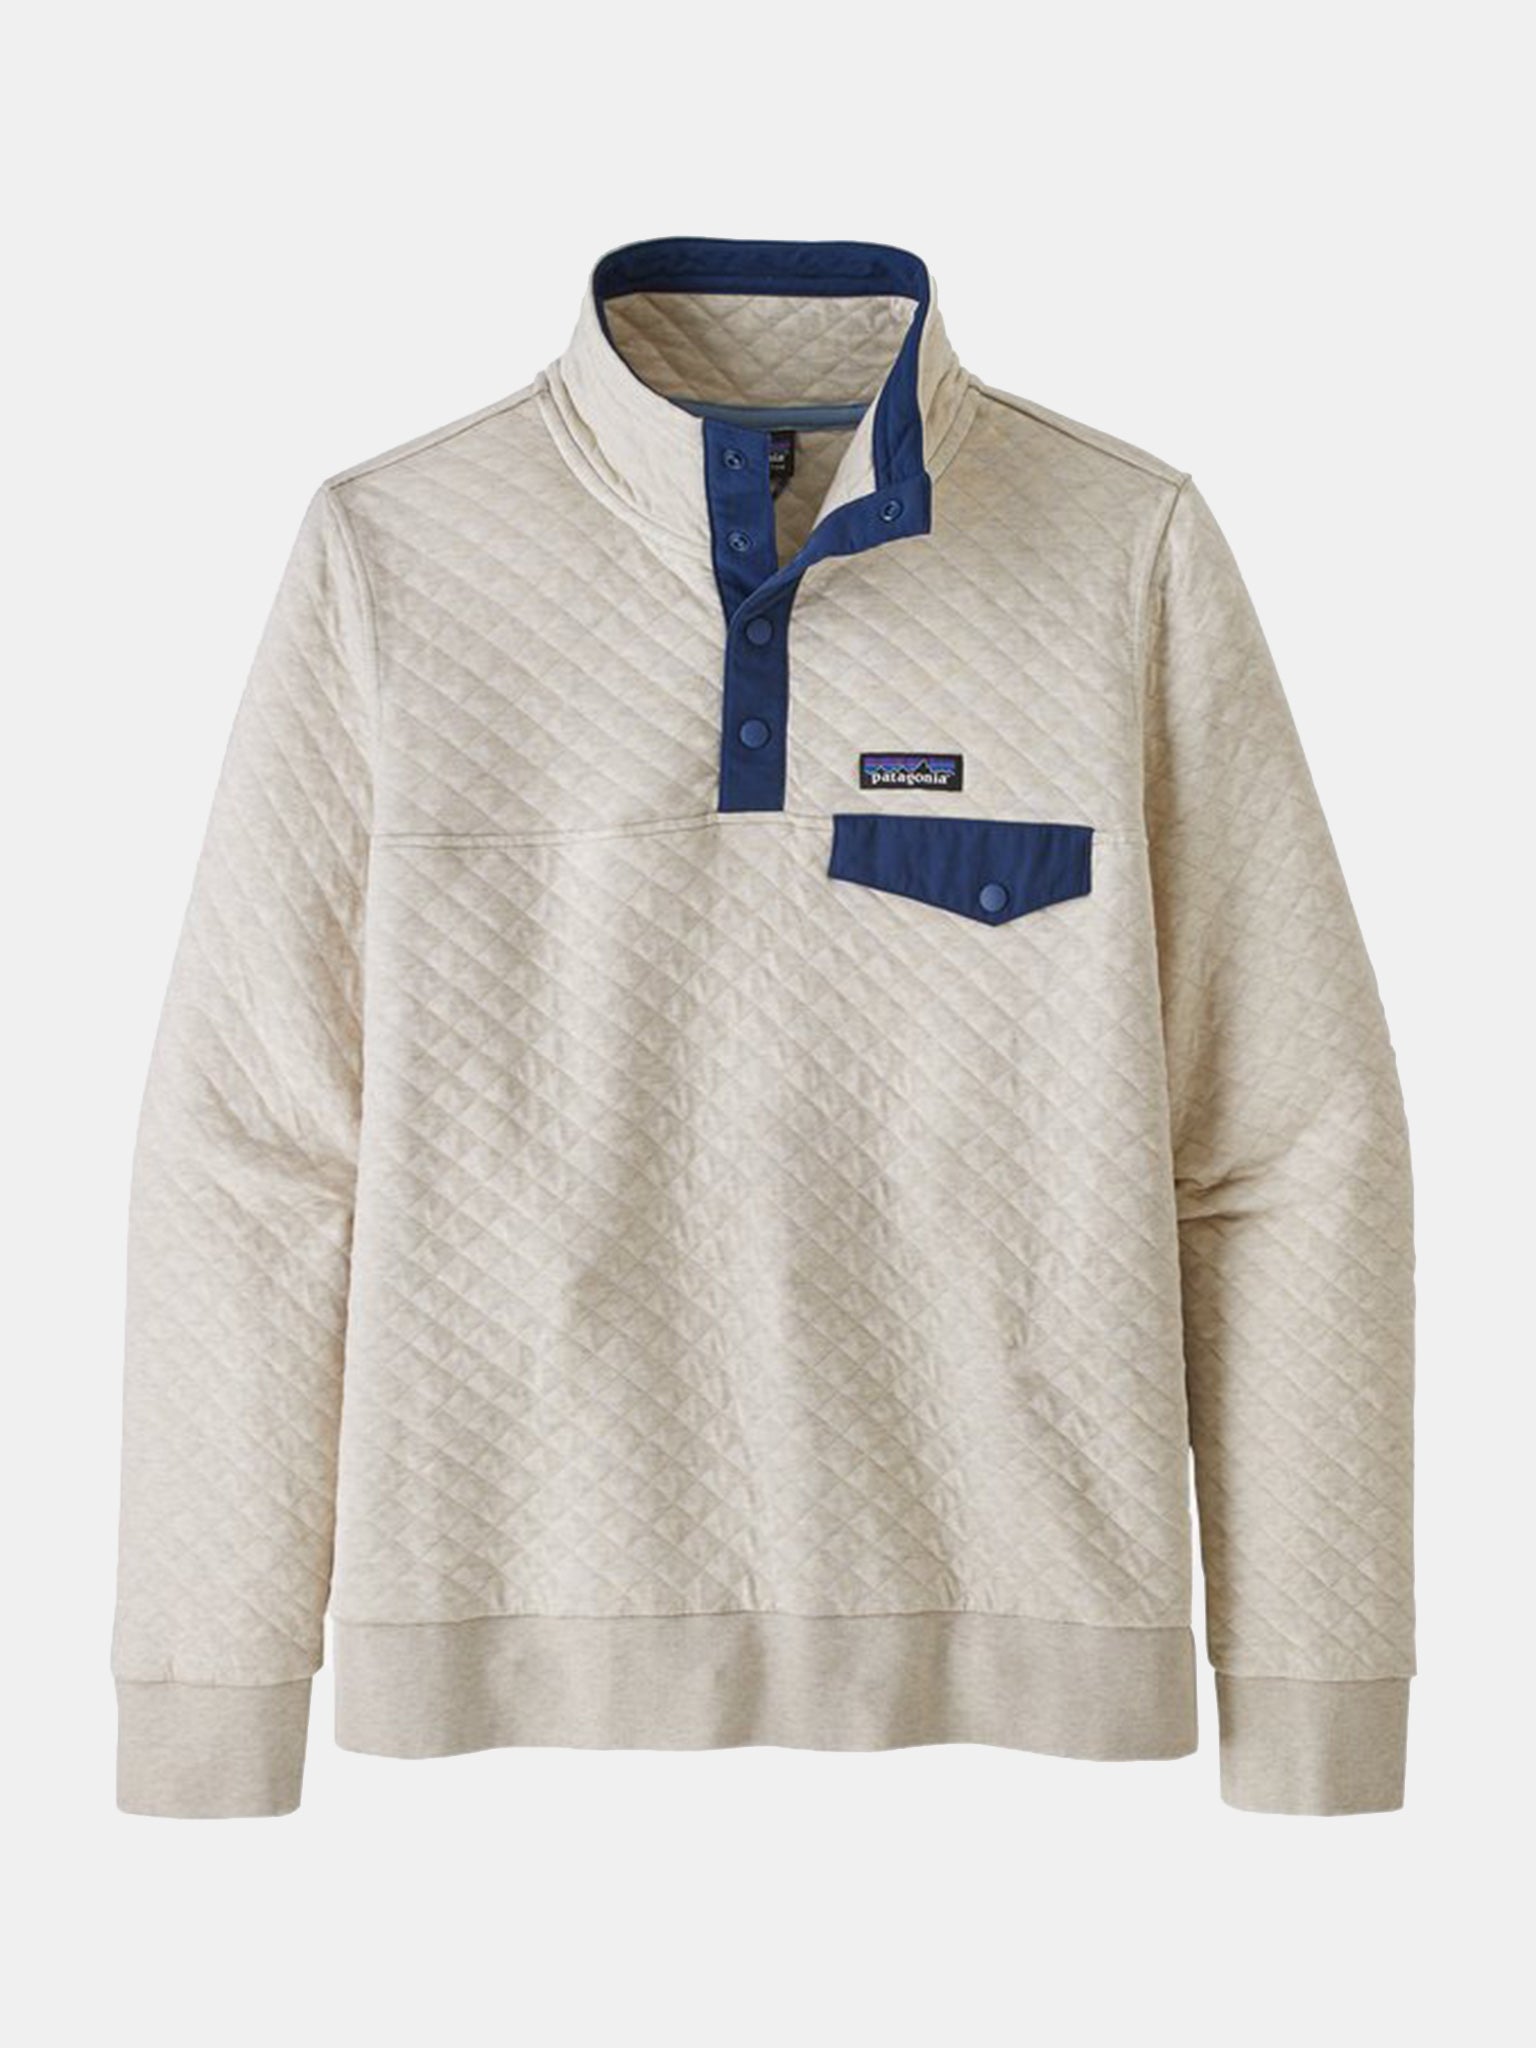 Patagonia Women's Cotton Quilt Snap-T Pull Over